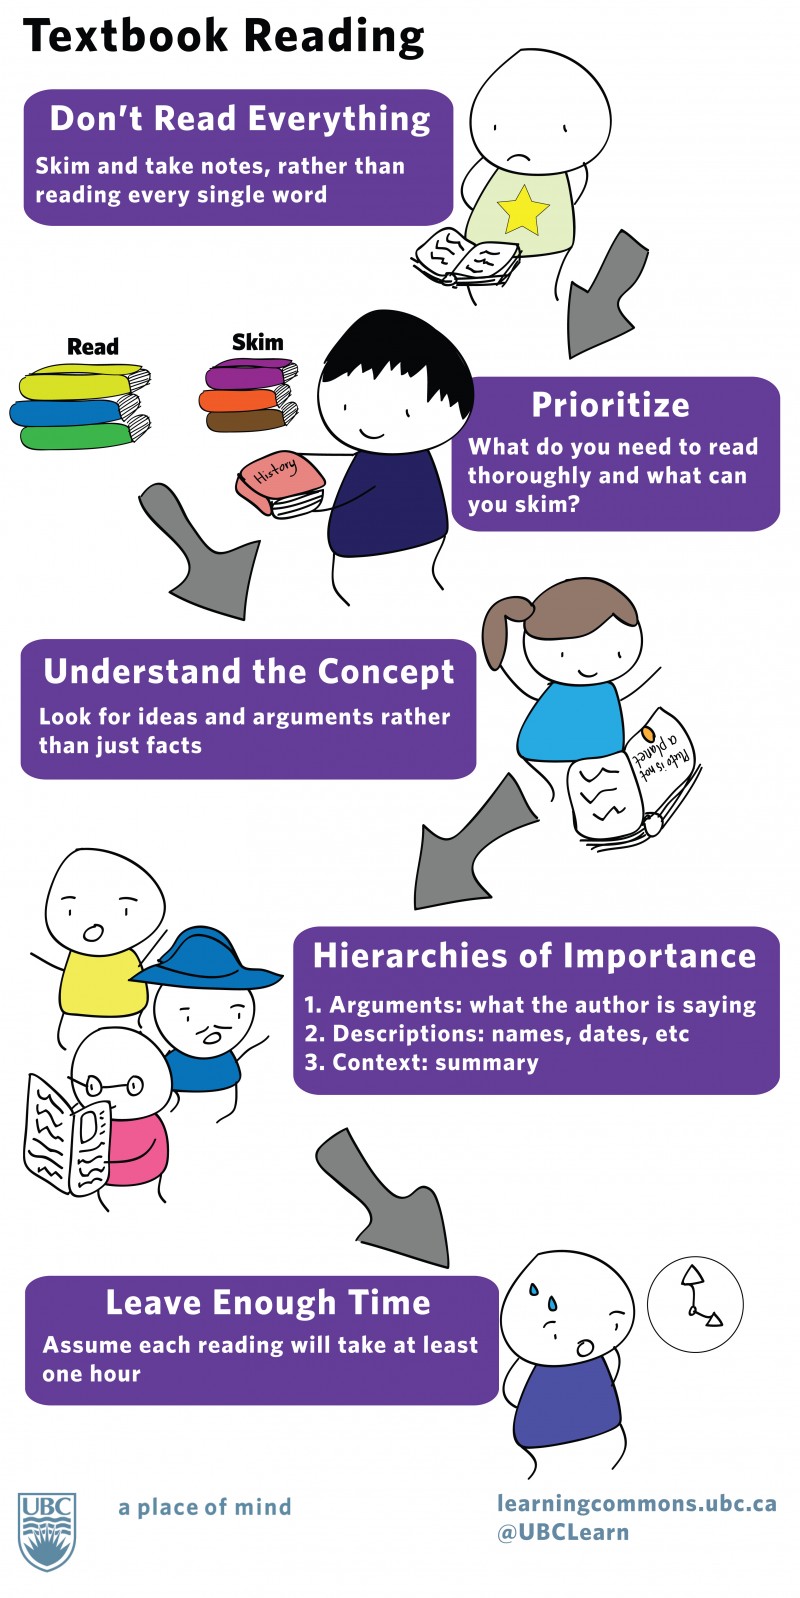 Infographic titled Textbook Reading. Purple text bubbles move from the top down. First, "Don't read everything. Skim and take notes, rather than reading every single word." A cartoon figure reads a book. Next, "Prioritize: What do you need to read thoroughly and what can you skim?" A cartoon figure sorts books into two piles, Read and Skim. Next, "Understand the Concept: Look for ideas and arguments rather than just facts." A cartoon figure smiles and raises arms while reading a book. Next: "Hierarchies of Importance: 1. Arguments: what the author is saying; 2. Descriptions: names, dates, etc. 3: Context: summary." Three cartoon figures wearing different colored costumes appear. Last: "Leave enough time: Assume each reading will take at least one hour." A cartoon figure looks at a clock while sweating.